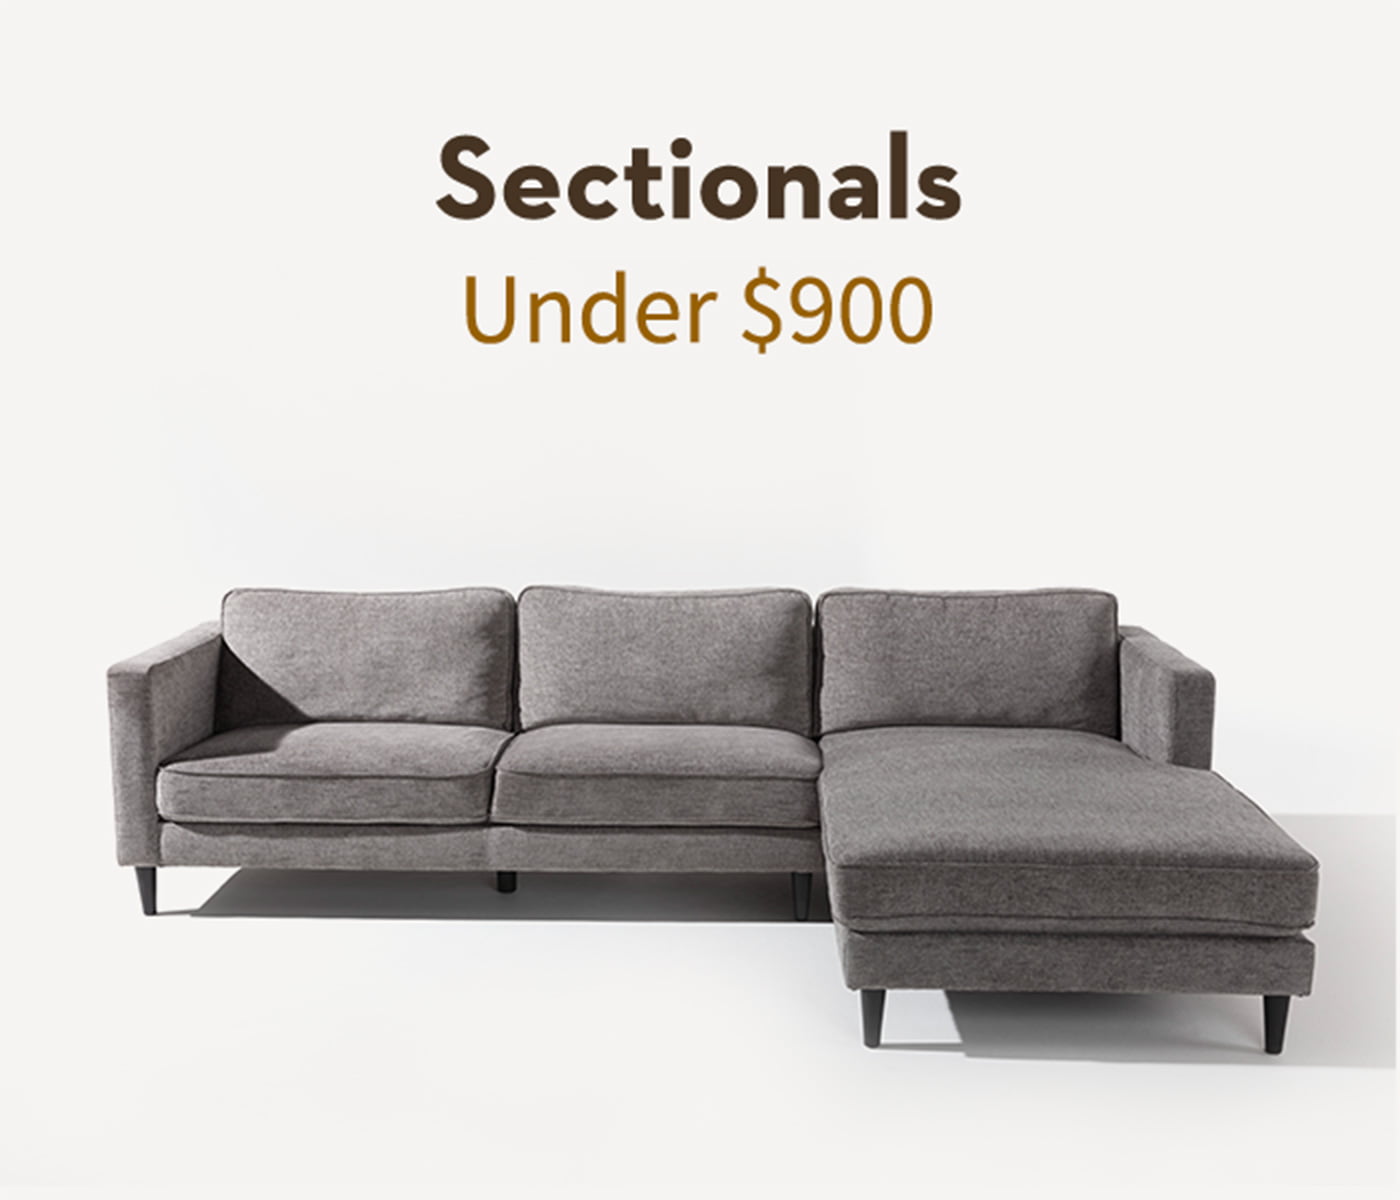 Sectionals under $900